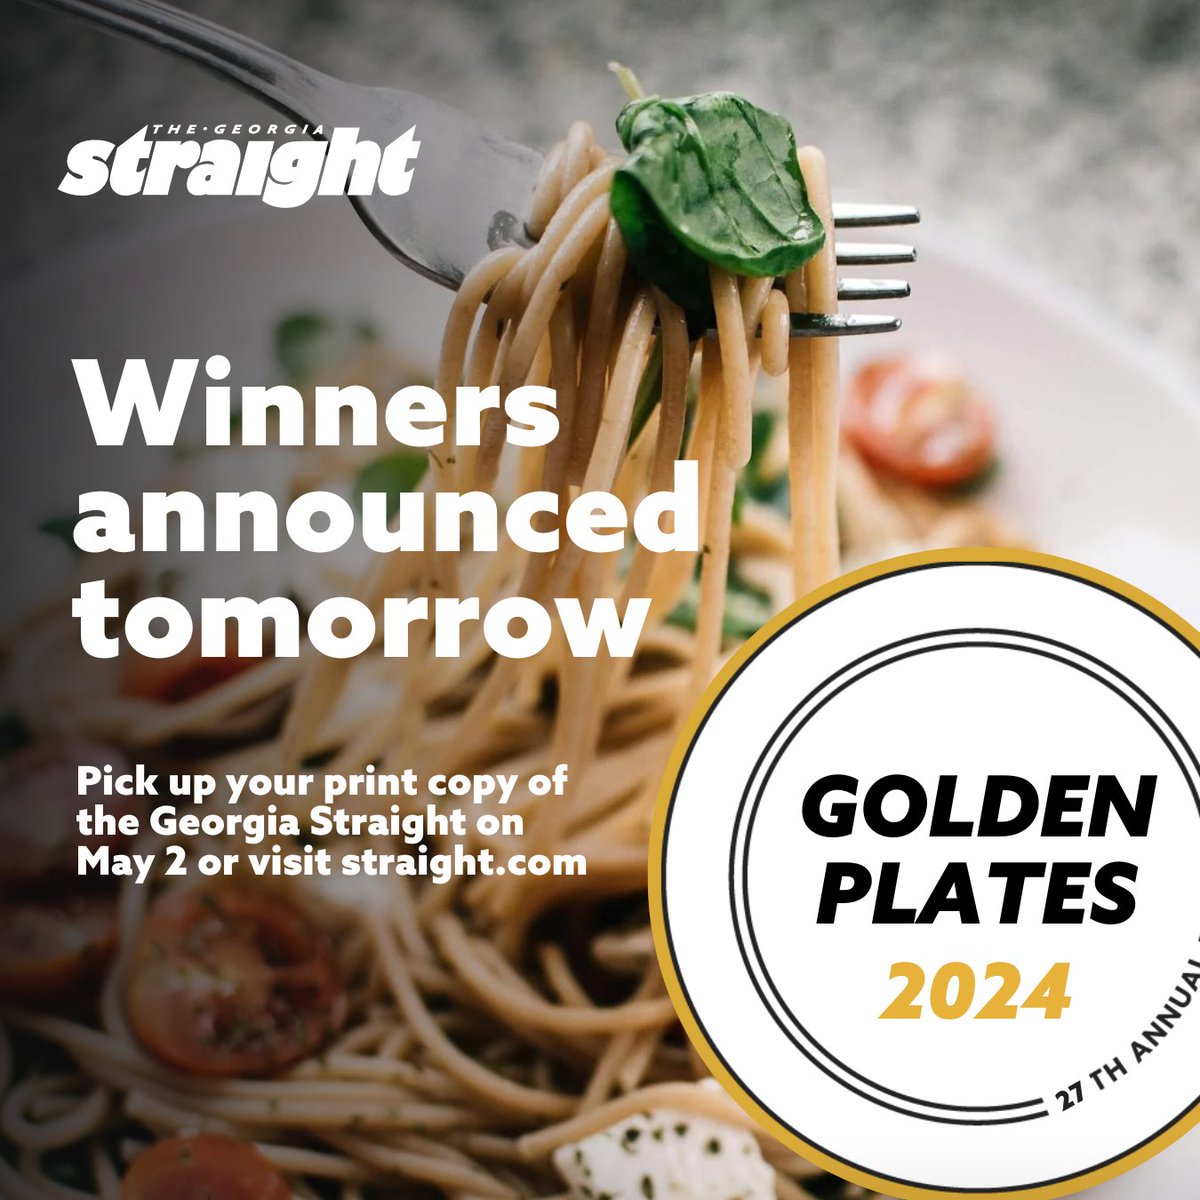 New print edition drops tomorrow, along with the winners of this year's Golden Plates awards. 🗞️ Stay tuned. 👀 P.S - a map of our newsstands can be found here: straight.com/find-us